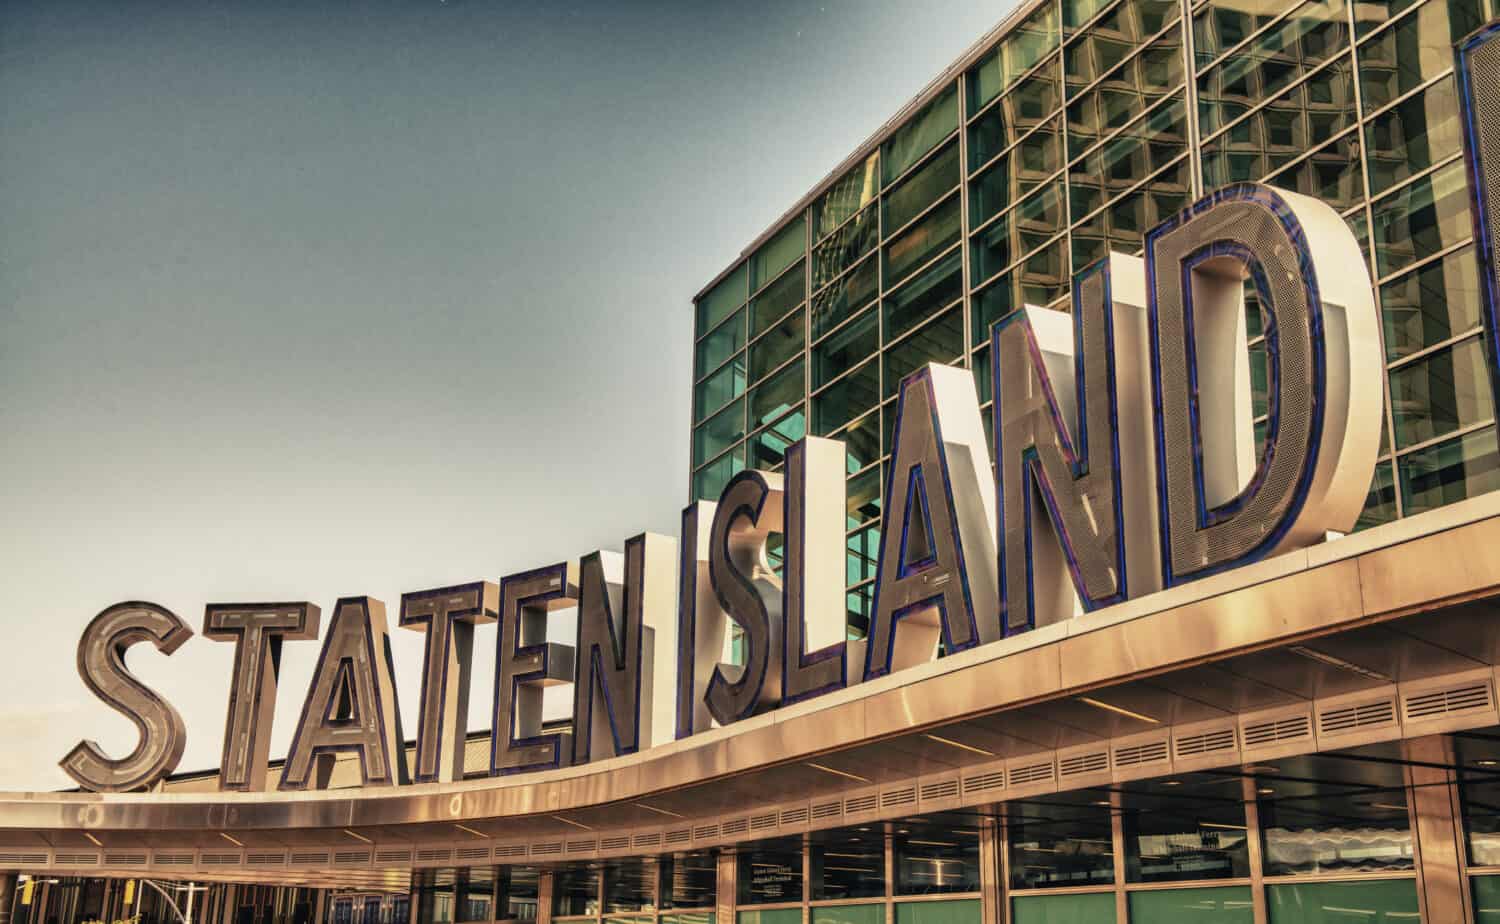 Famous Staten Island Ferry entrance sign - New York City.